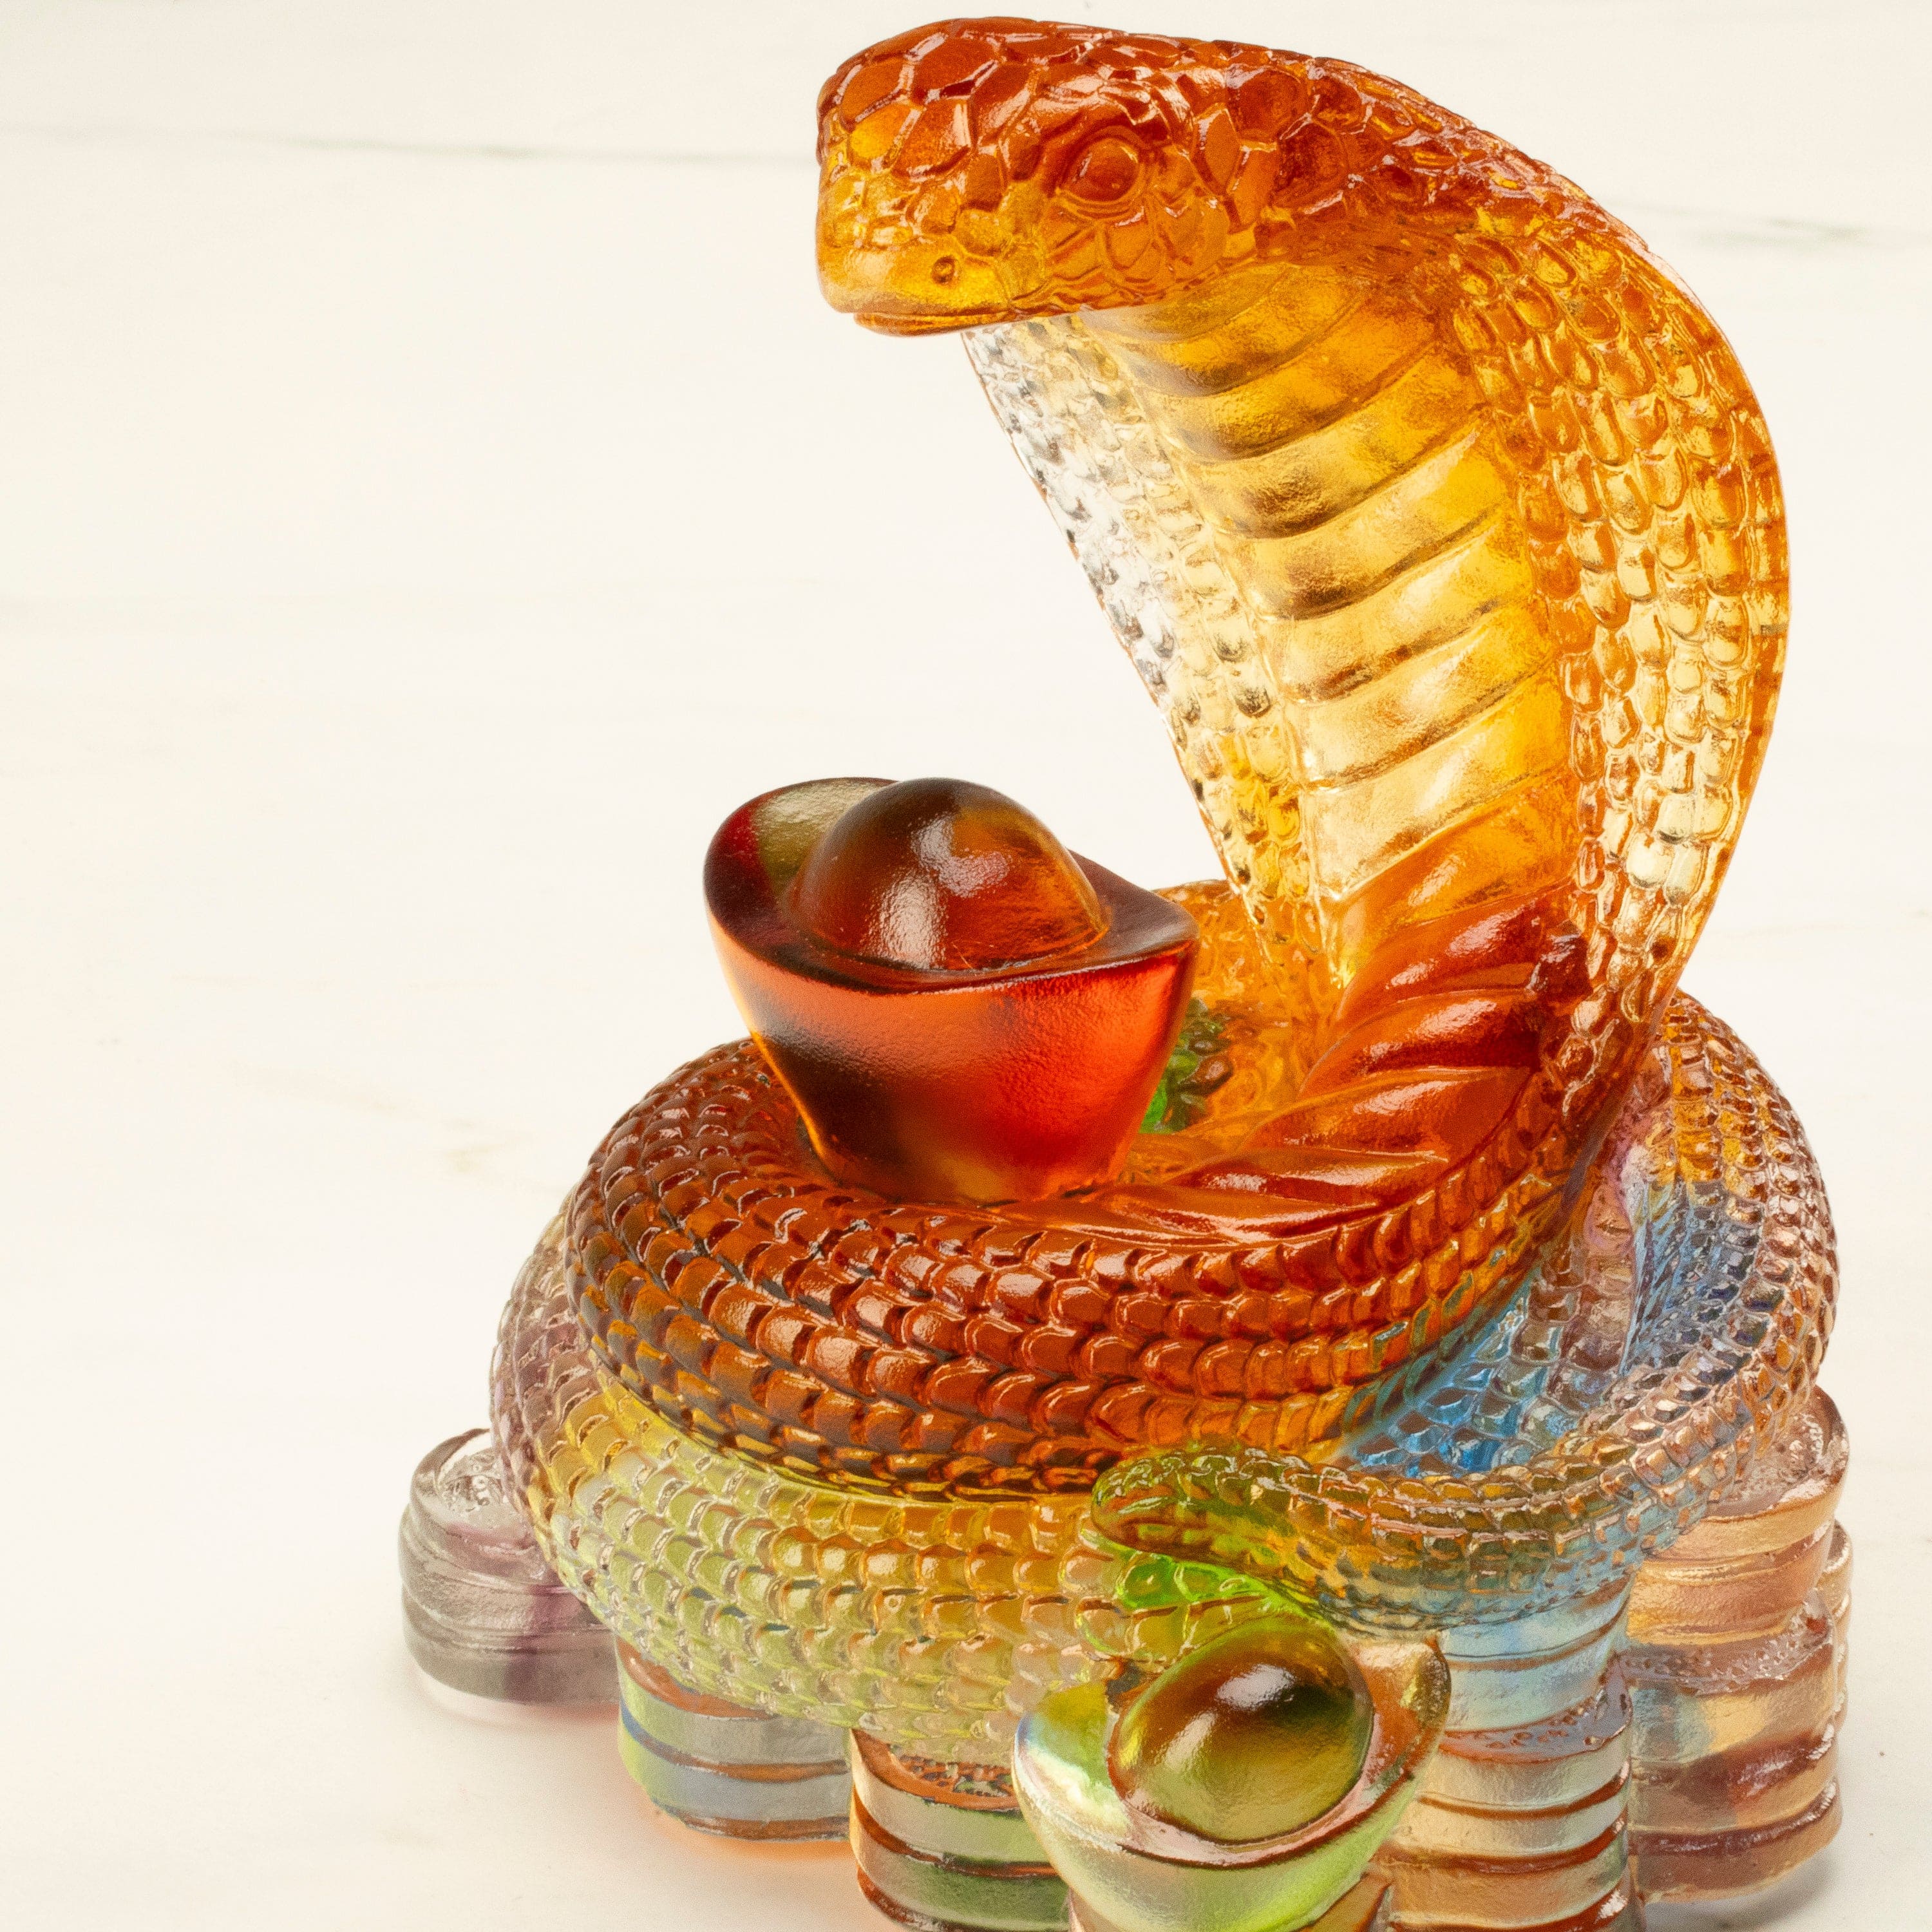 Kalifano Crystal Carving Exquisite Snake Crystal Carving - A Symbol of Wisdom and Intuition CRZ210-SNA